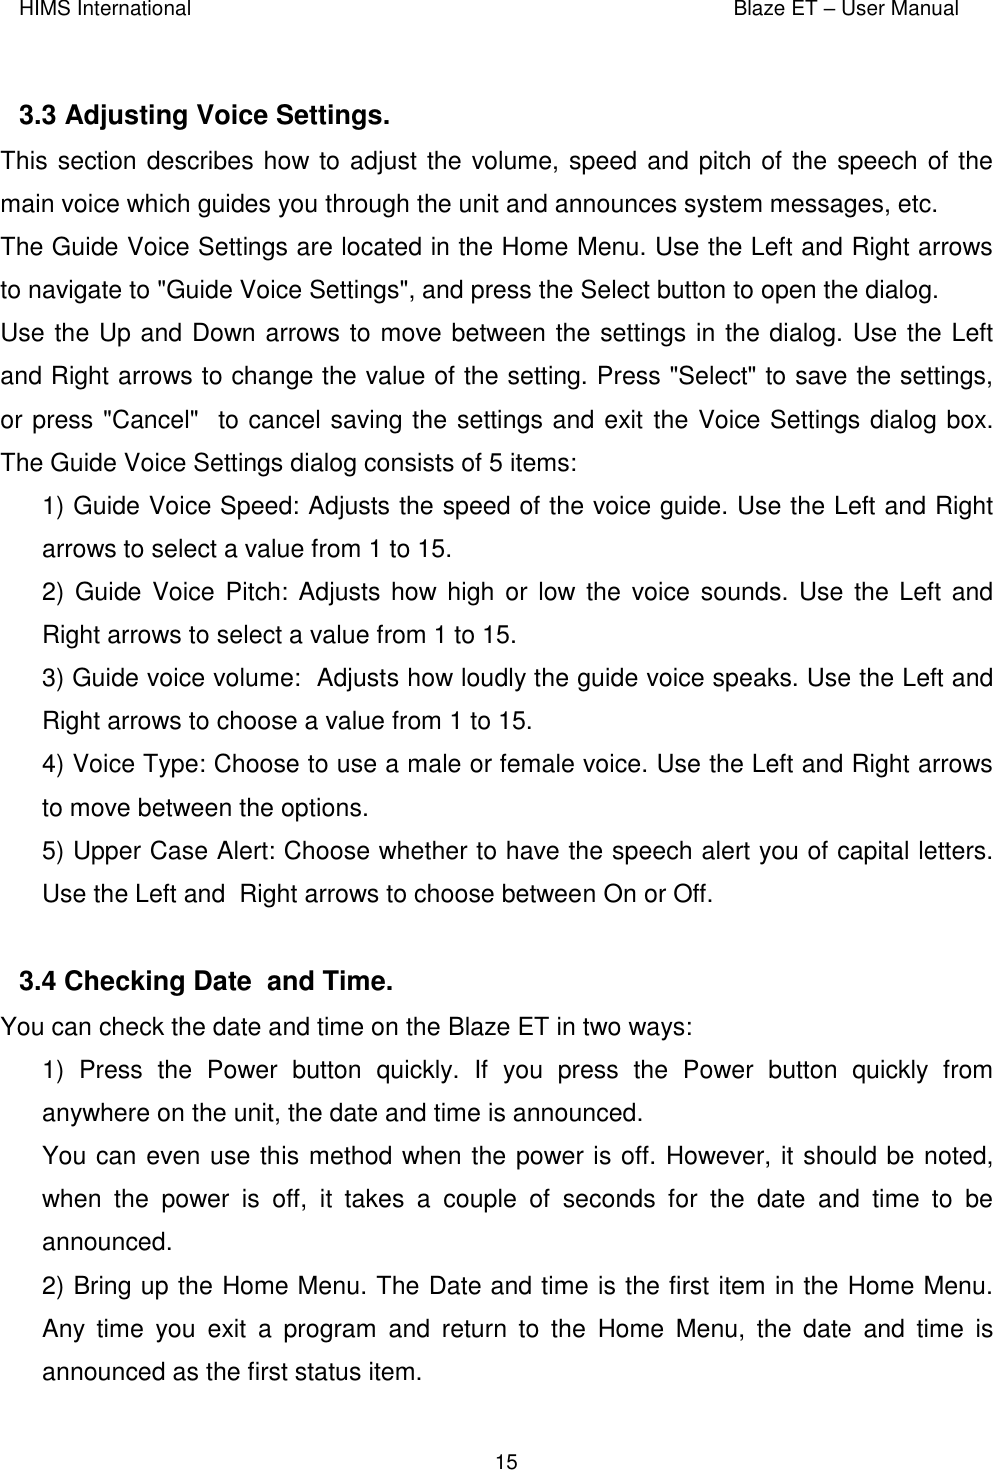 HIMS International    Blaze ET – User Manual      15  3.3 Adjusting Voice Settings.  This section describes how to adjust the volume, speed and pitch of the speech of the main voice which guides you through the unit and announces system messages, etc.  The Guide Voice Settings are located in the Home Menu. Use the Left and Right arrows to navigate to &quot;Guide Voice Settings&quot;, and press the Select button to open the dialog. Use the Up and Down arrows to move between the settings in the dialog. Use the Left and Right arrows to change the value of the setting. Press &quot;Select&quot; to save the settings, or press &quot;Cancel&quot;  to cancel saving the settings and exit the Voice Settings dialog box. The Guide Voice Settings dialog consists of 5 items:  1) Guide Voice Speed: Adjusts the speed of the voice guide. Use the Left and Right arrows to select a value from 1 to 15.  2) Guide Voice  Pitch: Adjusts how high or  low the voice  sounds. Use the Left and Right arrows to select a value from 1 to 15.   3) Guide voice volume:  Adjusts how loudly the guide voice speaks. Use the Left and Right arrows to choose a value from 1 to 15. 4) Voice Type: Choose to use a male or female voice. Use the Left and Right arrows to move between the options.   5) Upper Case Alert: Choose whether to have the speech alert you of capital letters. Use the Left and  Right arrows to choose between On or Off.  3.4 Checking Date  and Time.  You can check the date and time on the Blaze ET in two ways: 1)  Press  the  Power  button  quickly.  If  you  press  the  Power  button  quickly  from anywhere on the unit, the date and time is announced. You can even use this method when the power is off. However, it should be noted, when  the  power  is  off,  it  takes  a  couple  of  seconds  for  the  date  and  time  to  be announced. 2) Bring up the Home Menu. The Date and time is the first item in the Home Menu. Any  time  you  exit  a  program  and  return  to  the  Home  Menu,  the  date  and  time  is announced as the first status item. 